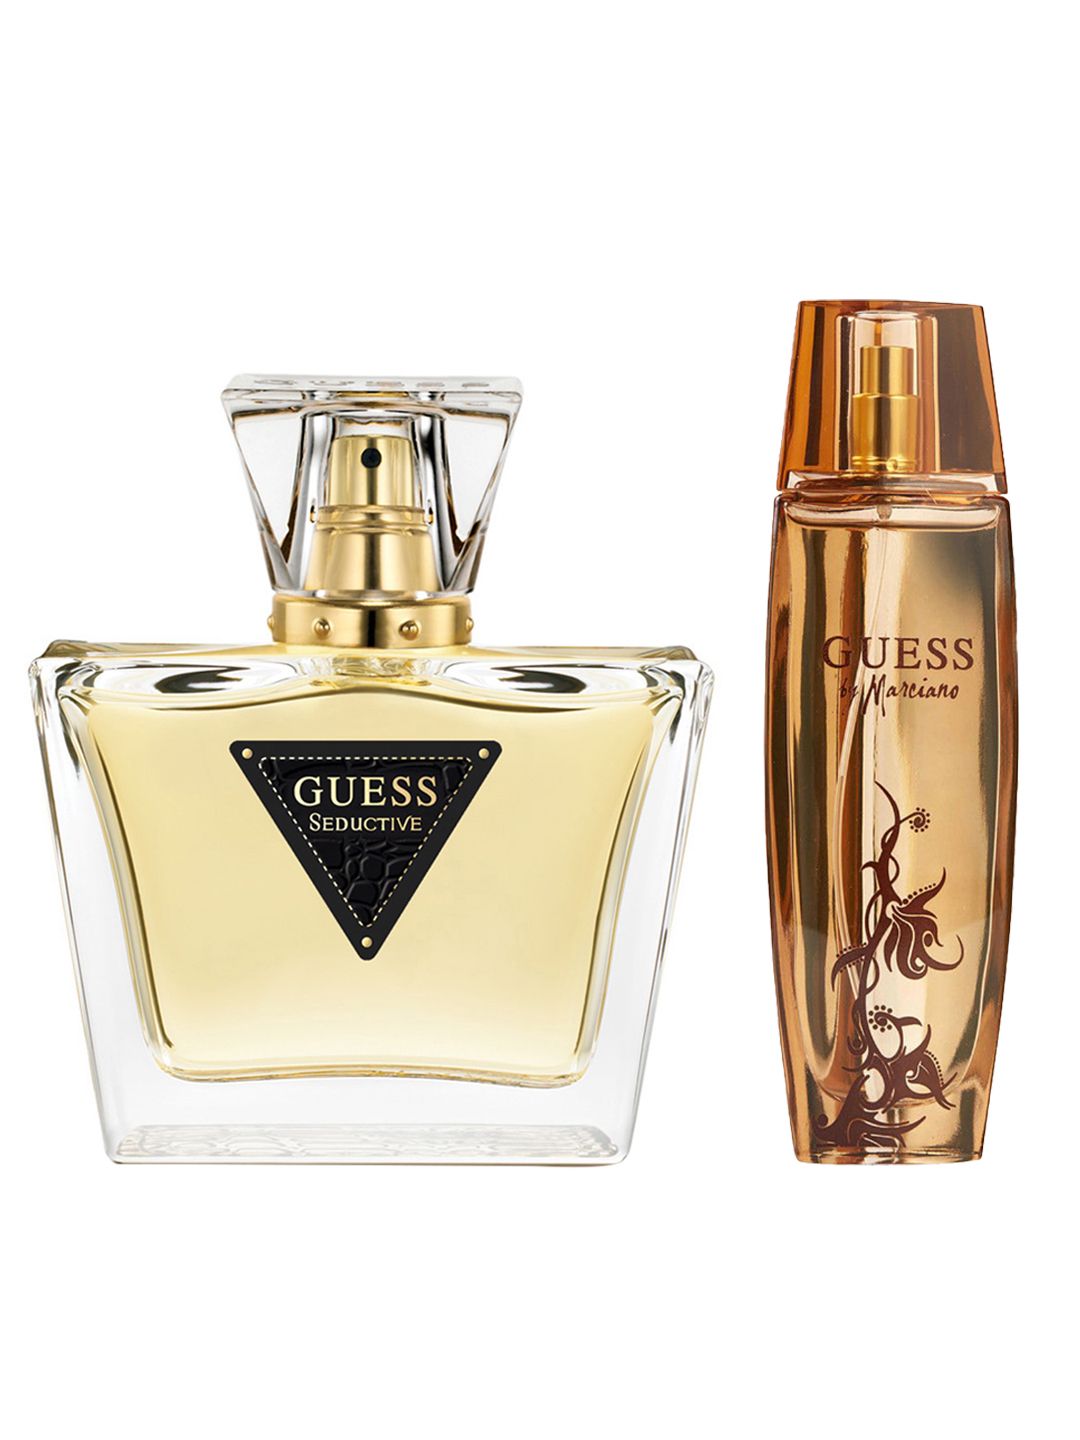 GUESS Women Set Of 2 EDT & EDP - Seductive & Marciano - 75ml & 100ml Price in India